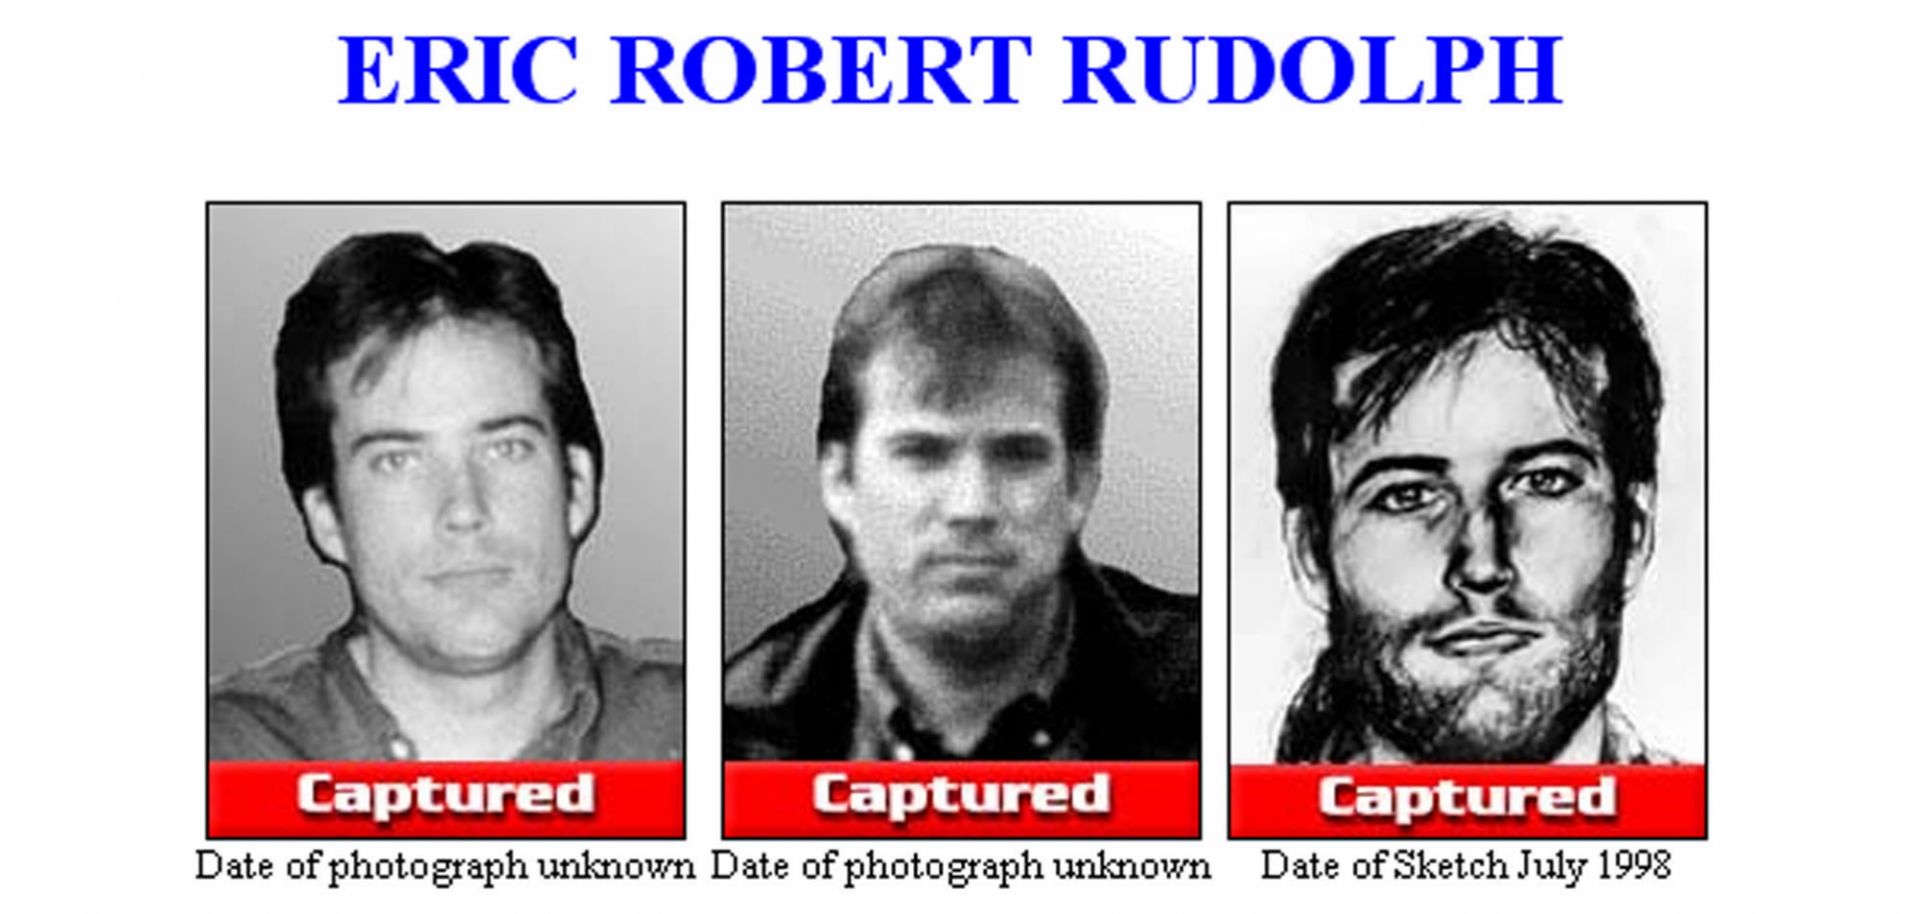 A screen grab from the FBI Ten Most Wanted Fugitive Webpage of Eric Robert Rudolph.